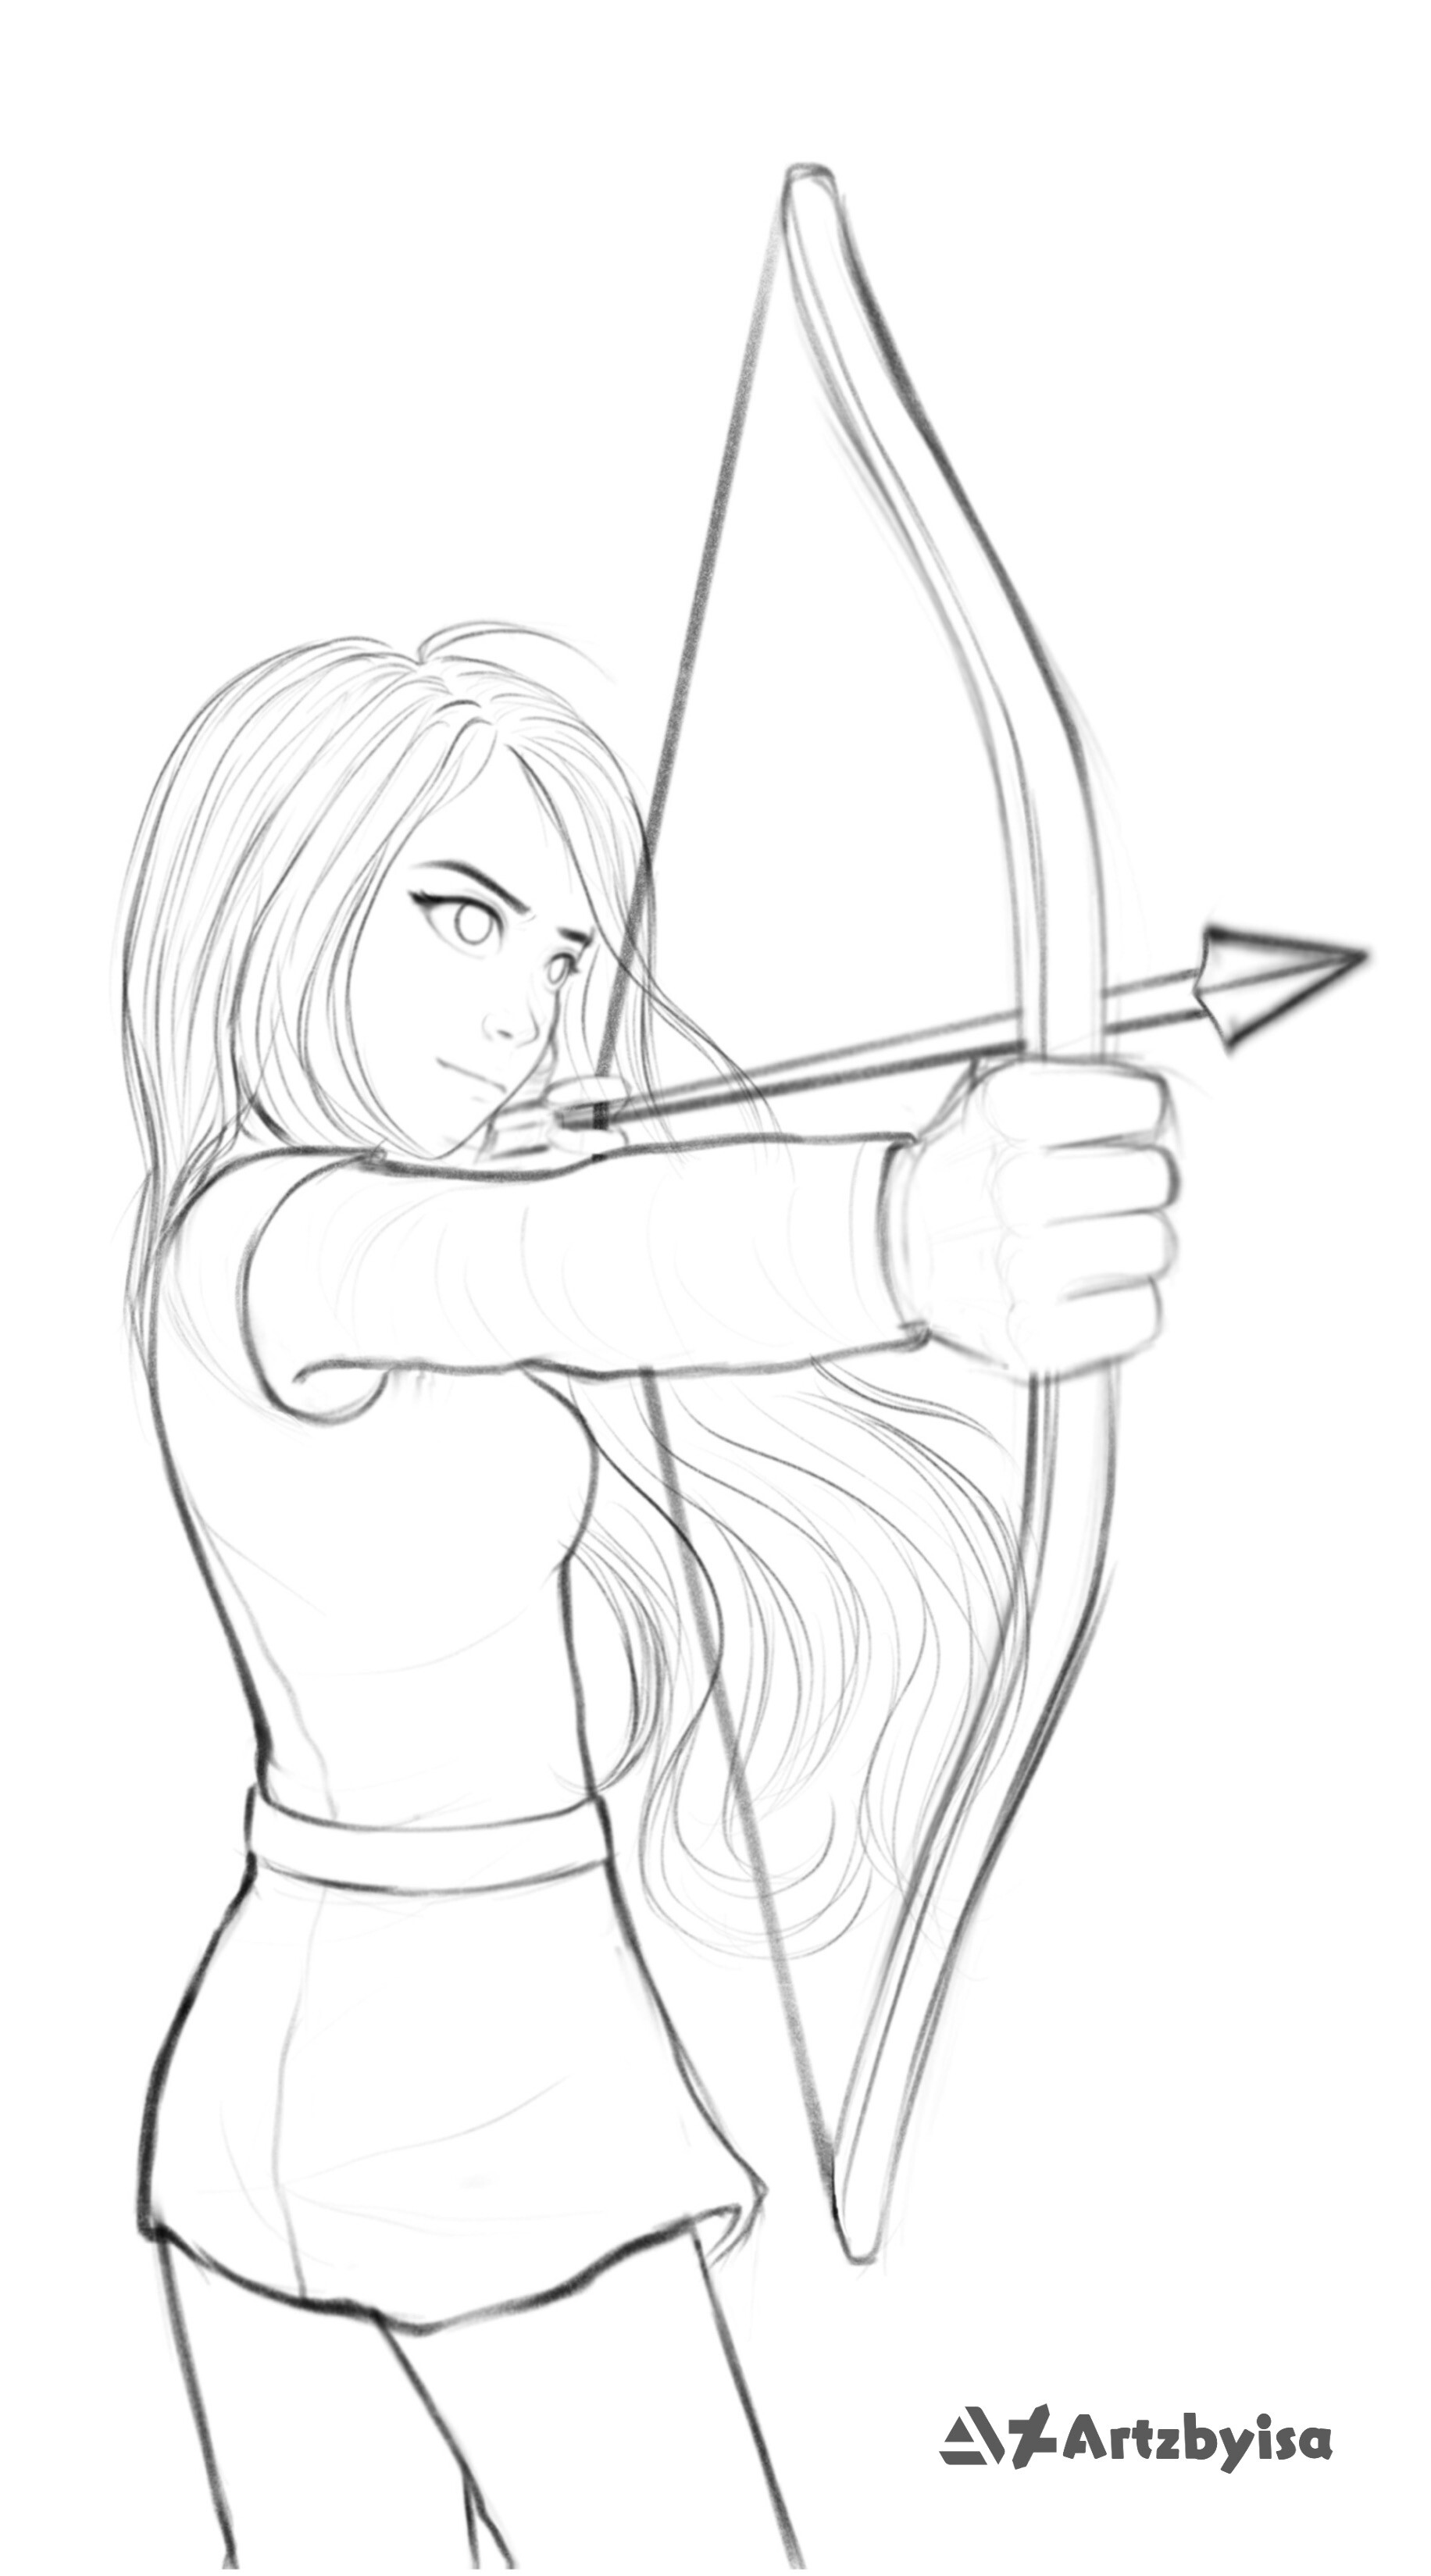 Download Bow And Arrow Archery Drawing Bow Draw  Arrow And Bow In Drawing   Full Size PNG Image  PNGkit